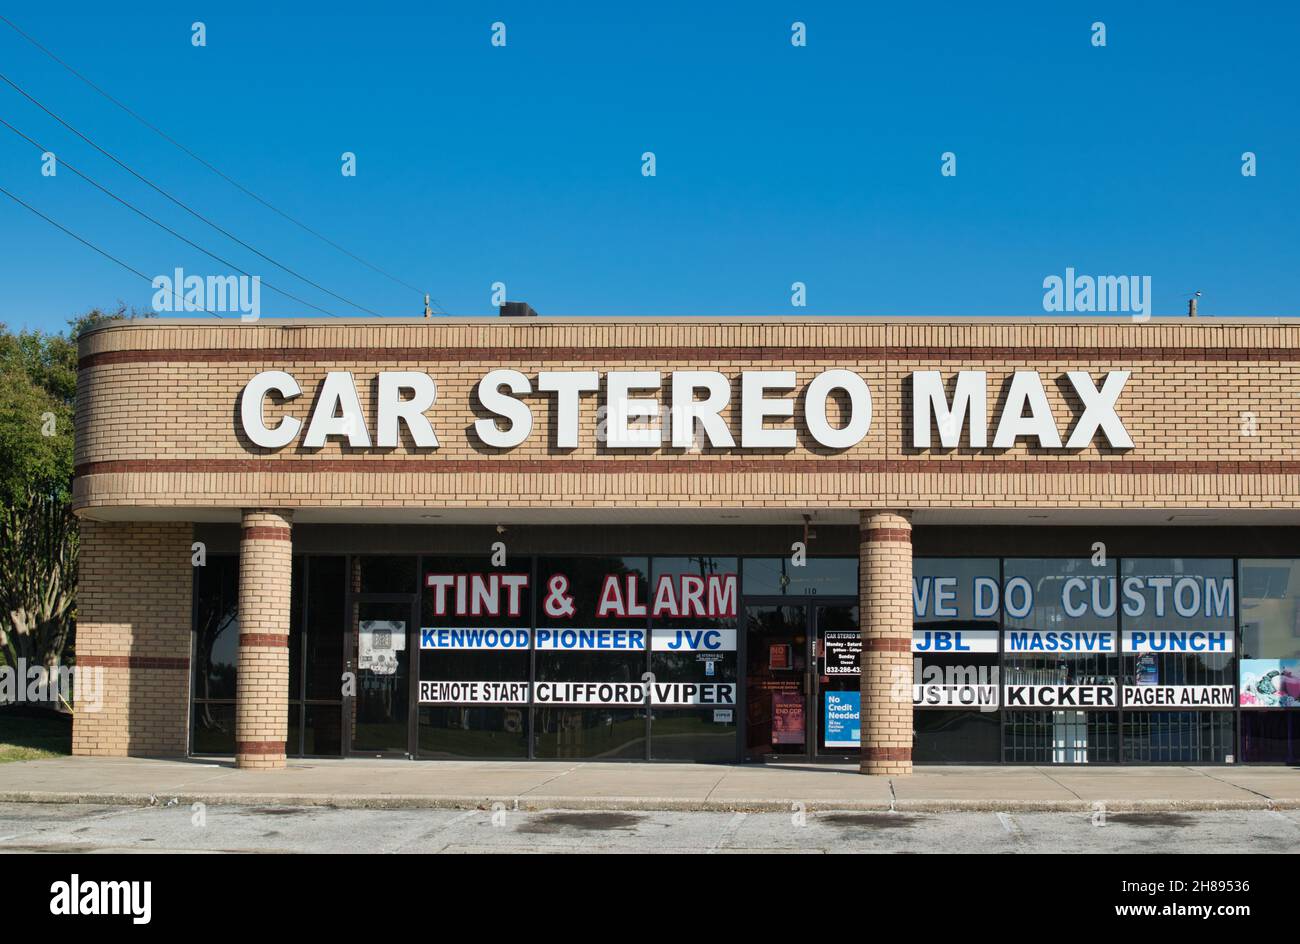 Houston, Texas USA 11-12-2021: Car Stereo Max storefront in Houston TX. Local automotive accessories installation company. Stock Photo